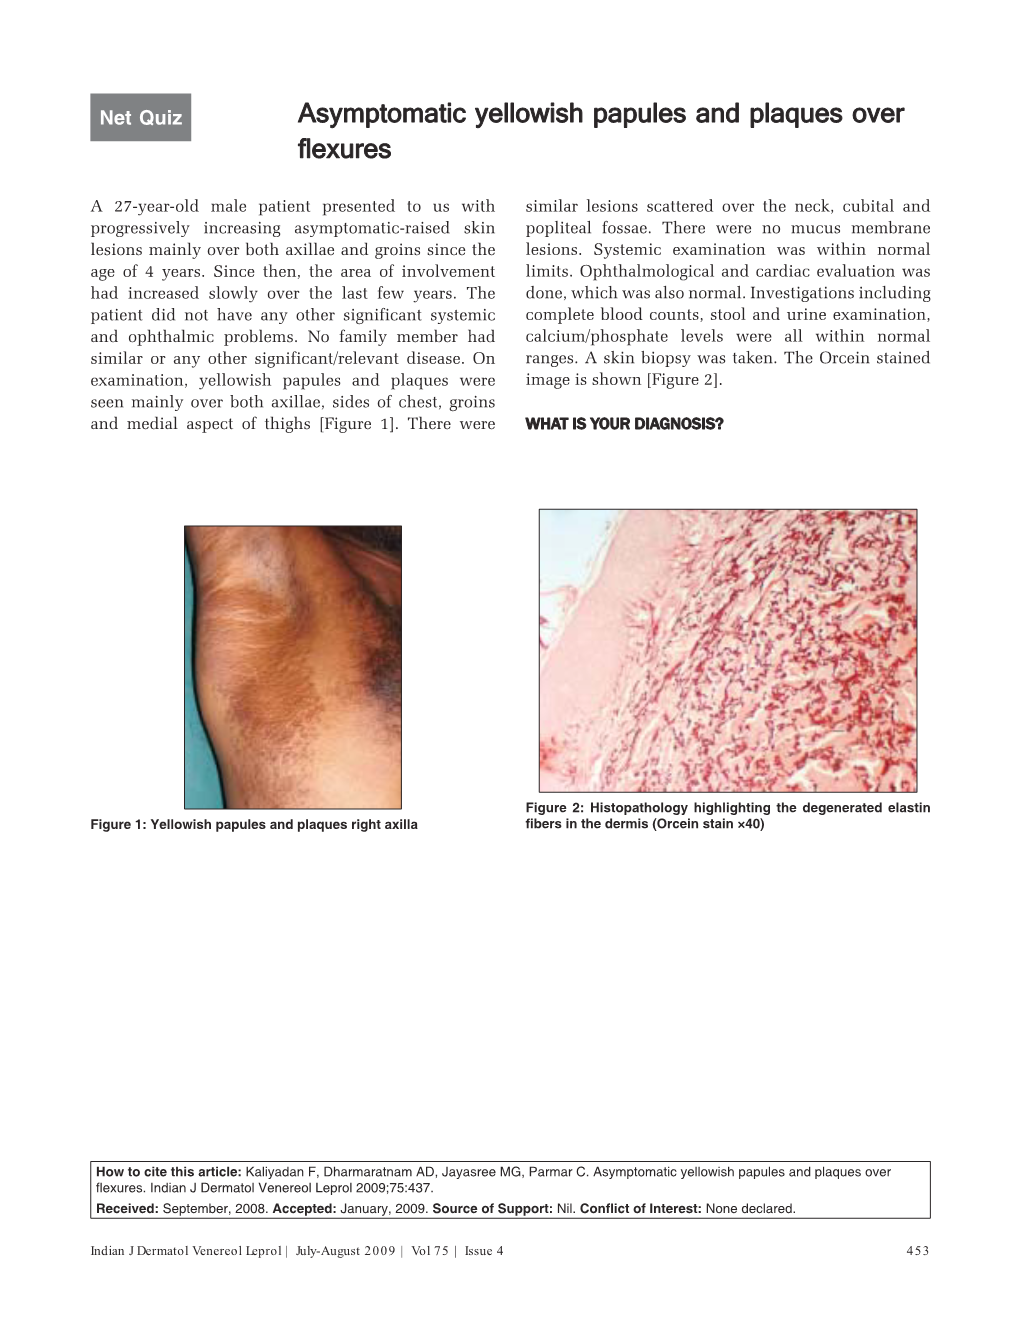 Asymptomatic Yellowish Papules and Plaques Over Flexures